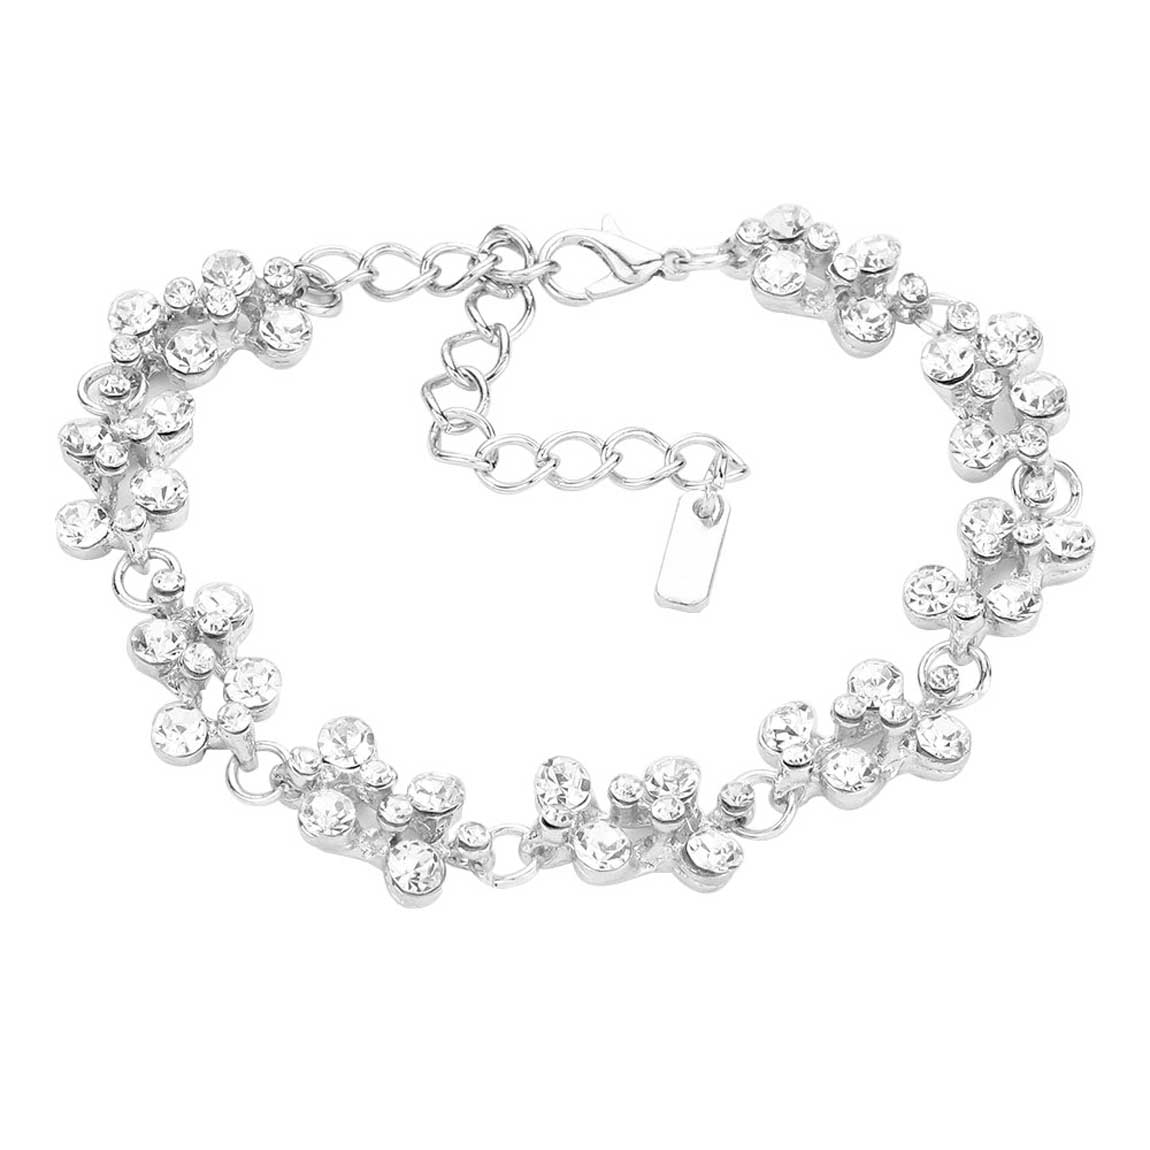 Silver Bubble Stone Evening Bracelet. Get ready with this Bubble Stone Evening Bracelets, put on a pop of color to complete your ensemble. Perfect for adding just the right amount of shimmer & shine and a touch of class to special events. Perfect Birthday Gift, Anniversary Gift, Mother's Day Gift, Thank you Gift.